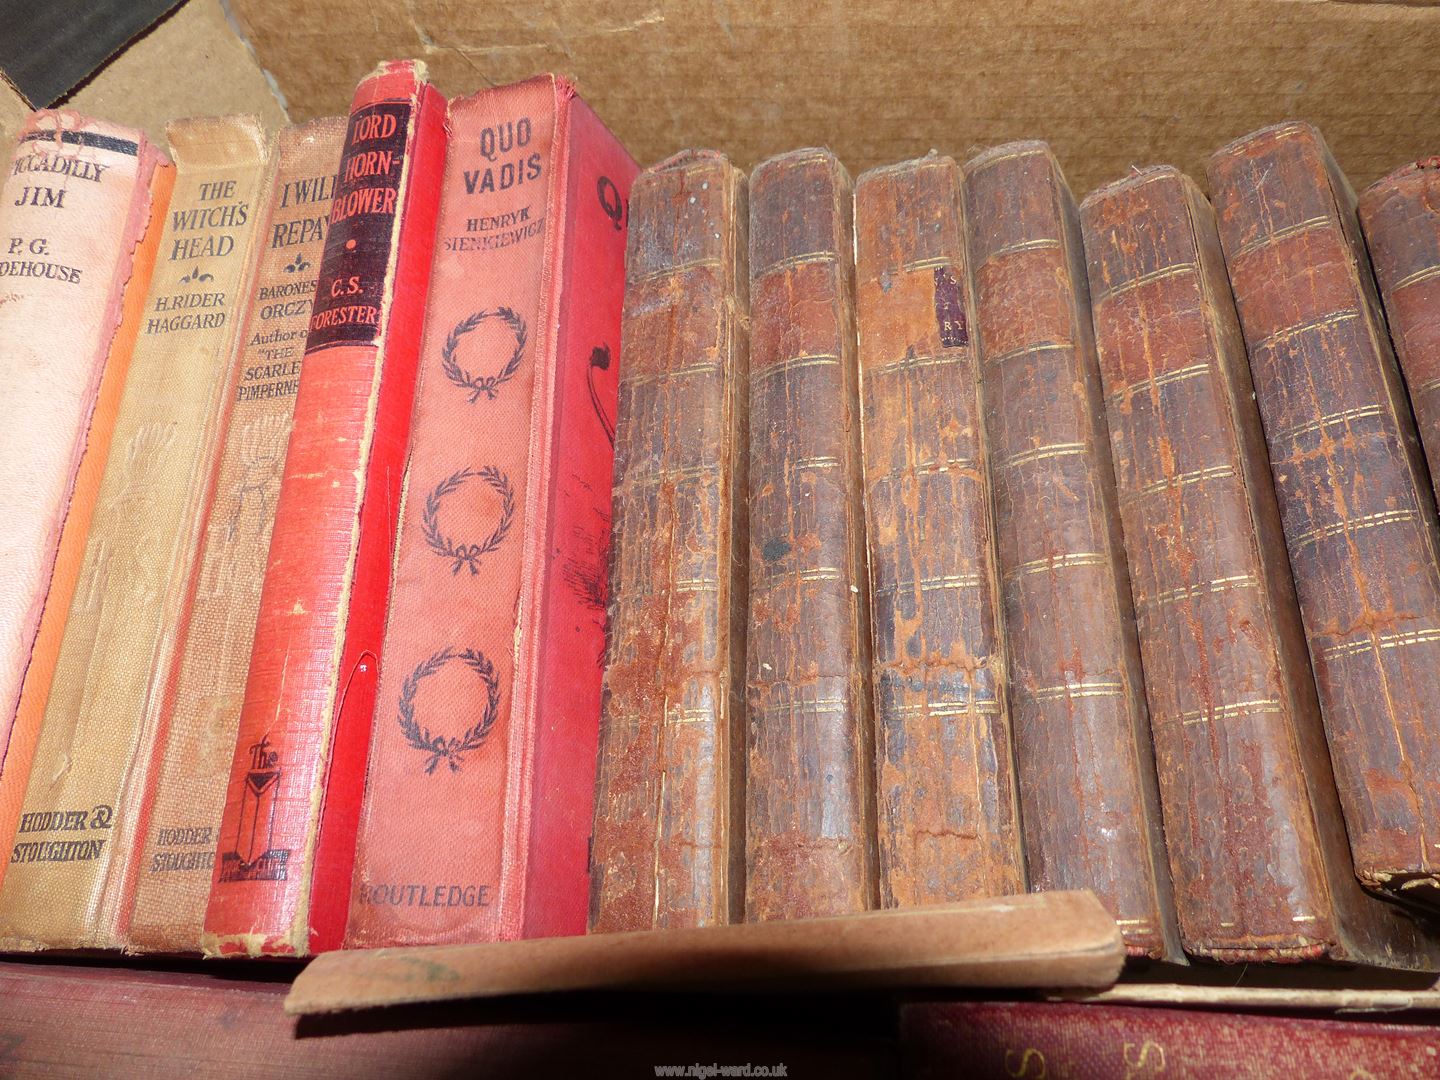 A quantity of Rudyard Kipling novels,The Ancient History By Mr Rollin 8 volumes, - Image 2 of 6